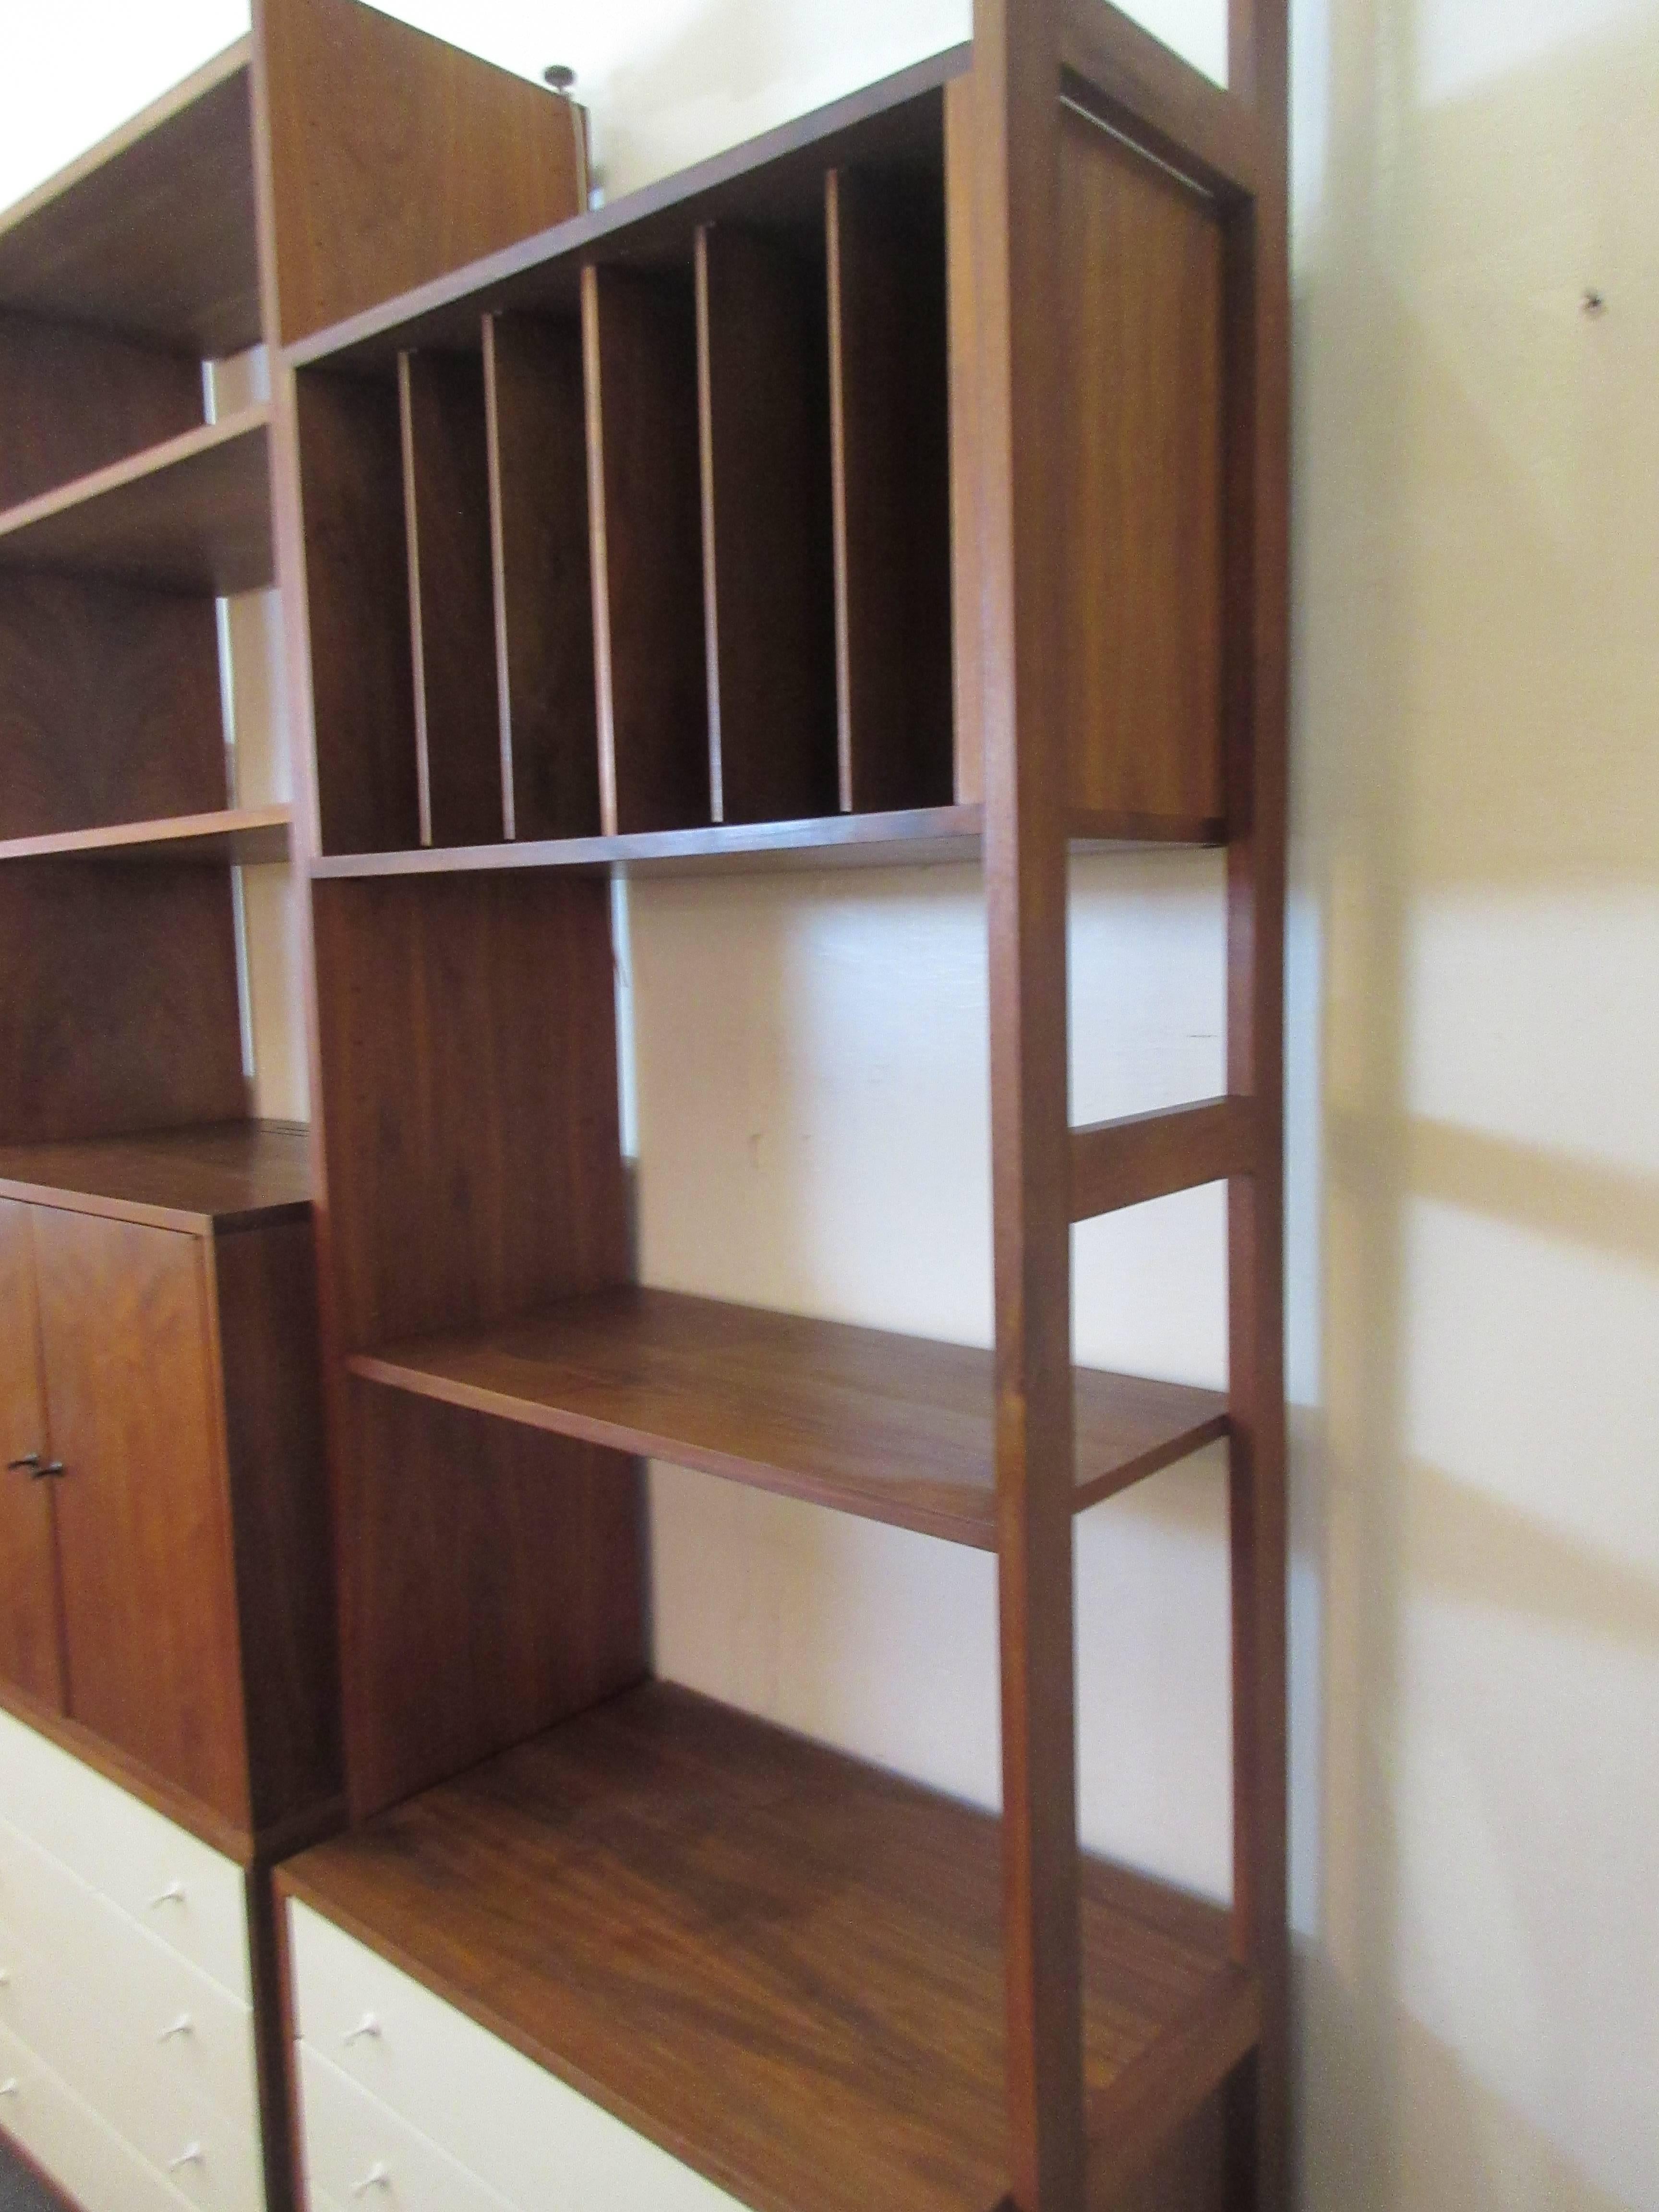 Hardwood house wall or room-divider shelving system with an infinite combination of possibilities. Unit is both for against a wall or freestanding as a divider. Cabinets can be positioned to face either direction when used as a divider. Included are